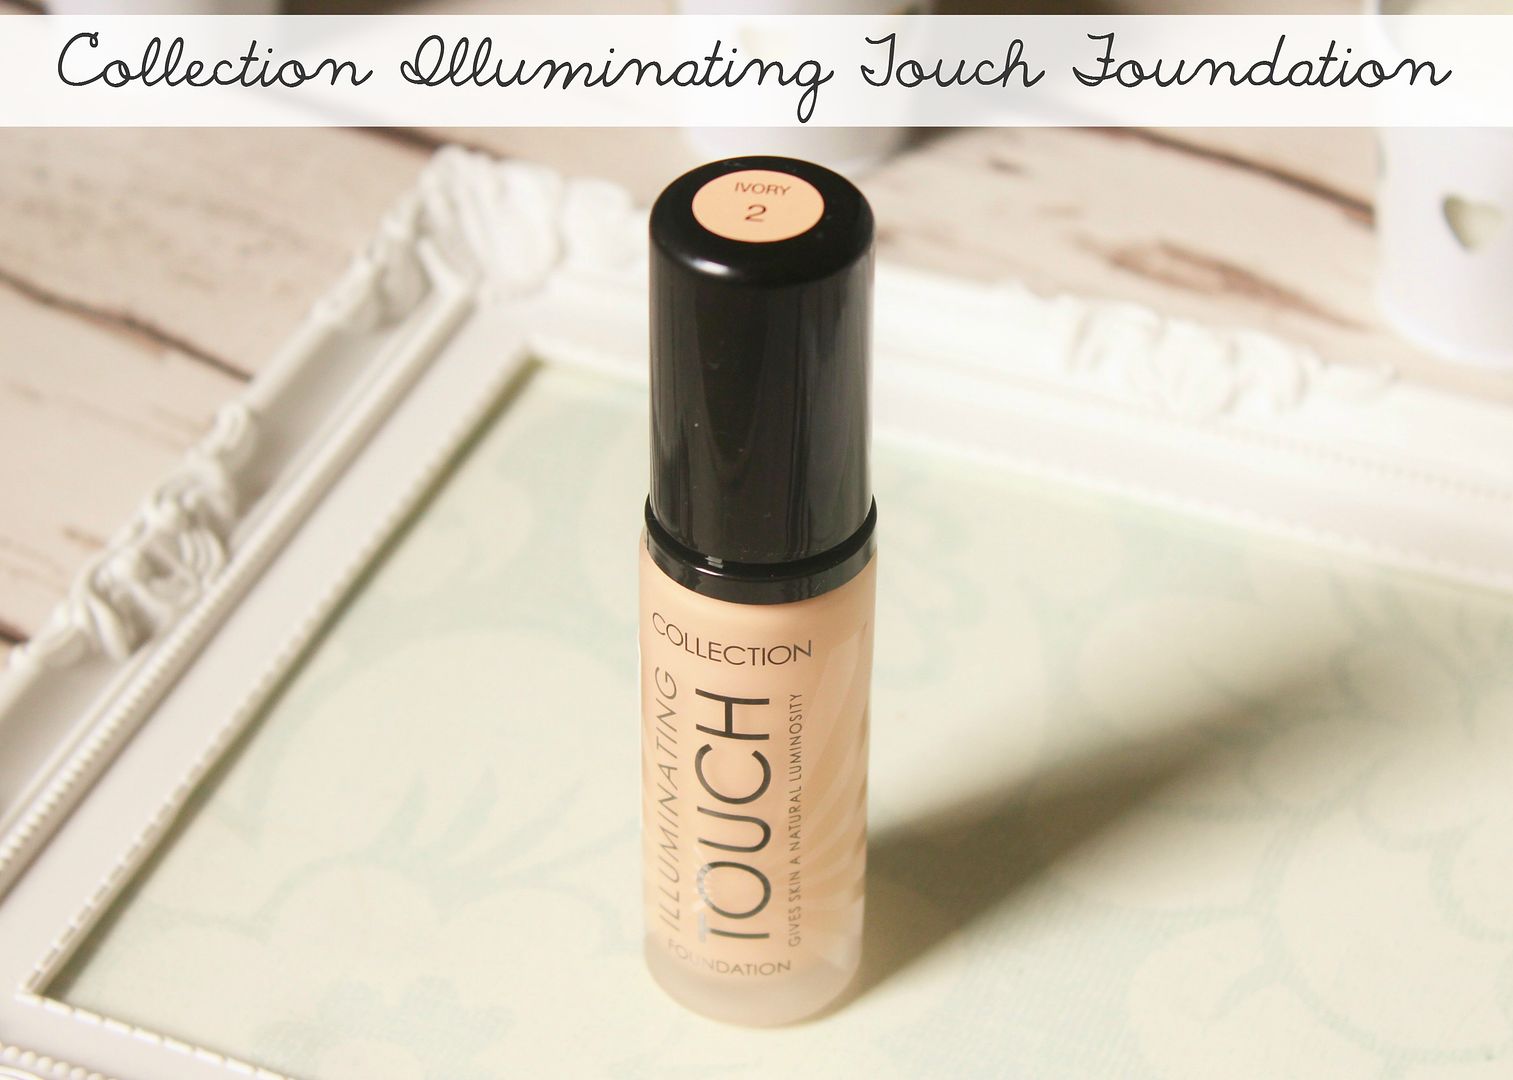 Collection-Illuminating-Touch-Foundation-2-Ivory-Packaging-Review-Belle-Amie-UK-Beauty-Fashion-Lifestyle-Blog